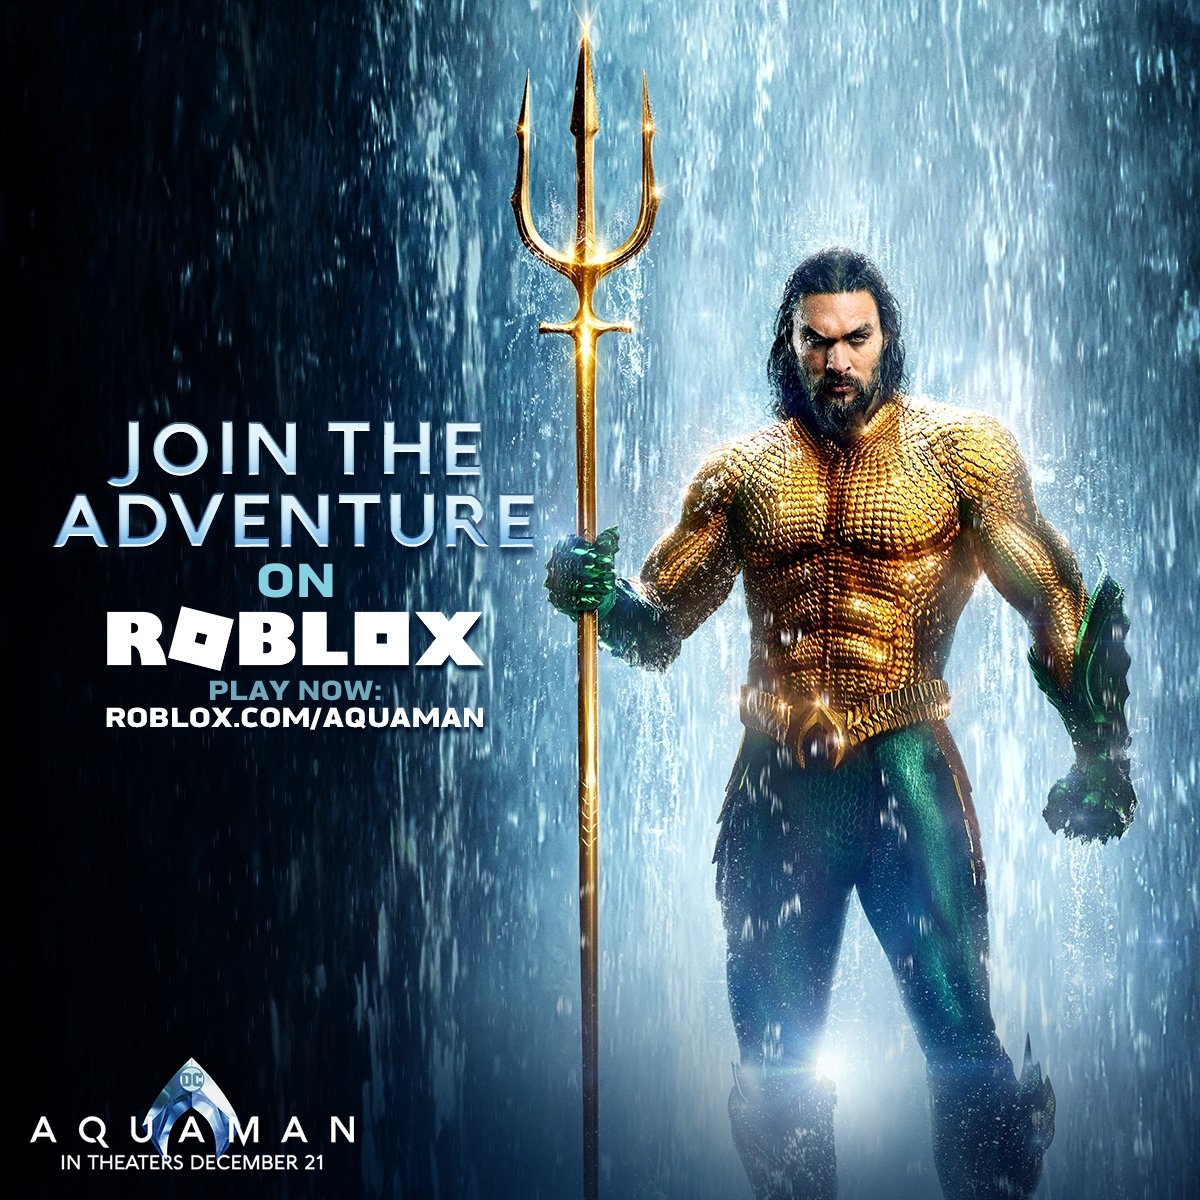 Aquaman Movie On Twitter What S Greater Than A King A Hero Join The Adventure With Aquaman Now On Roblox Https T Co 4q6mg7gxs8 - aquaman roblox event